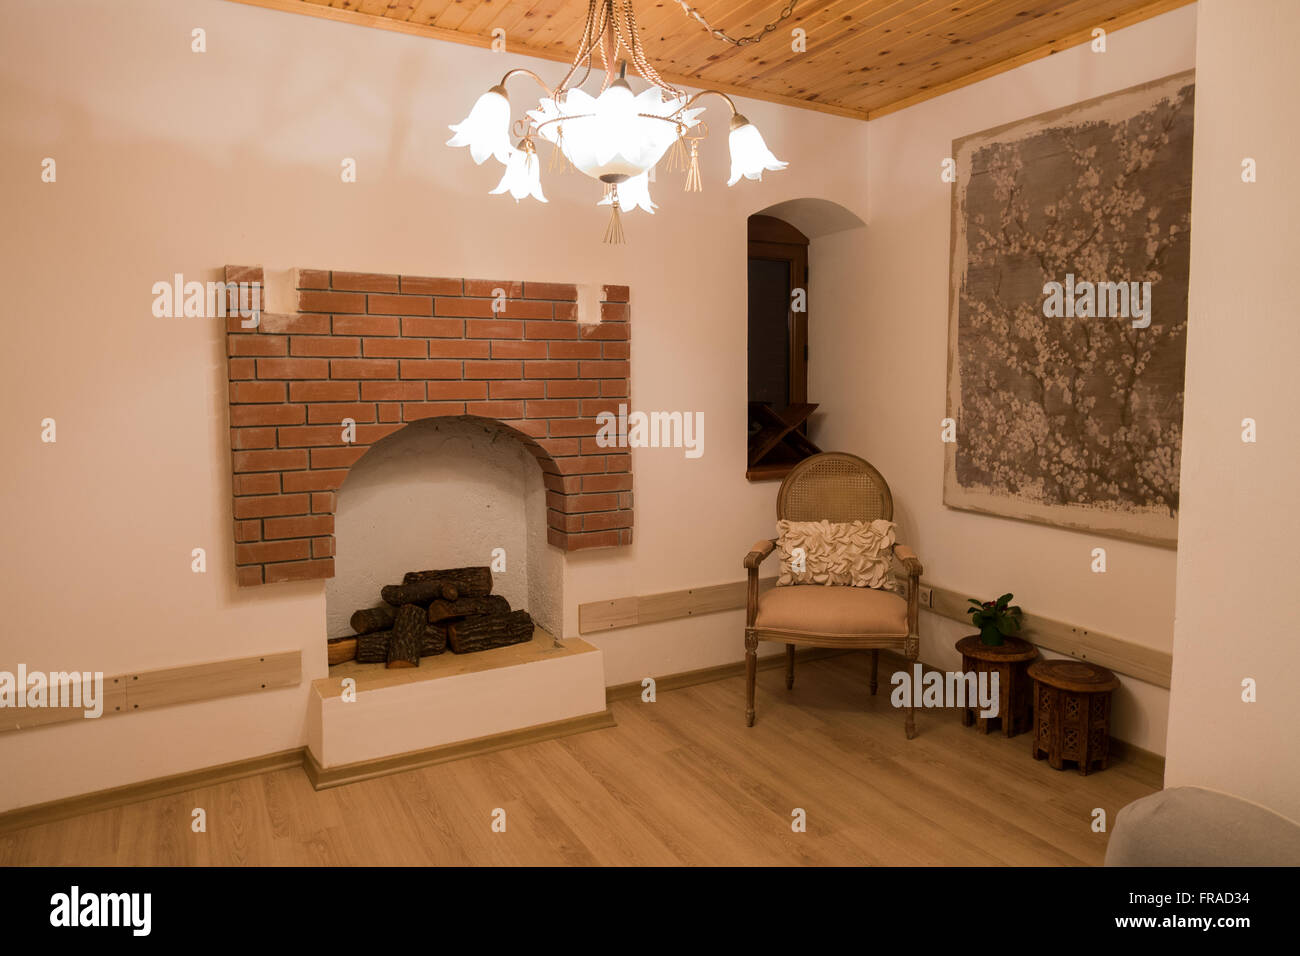 A nice room with open fire Stock Photo